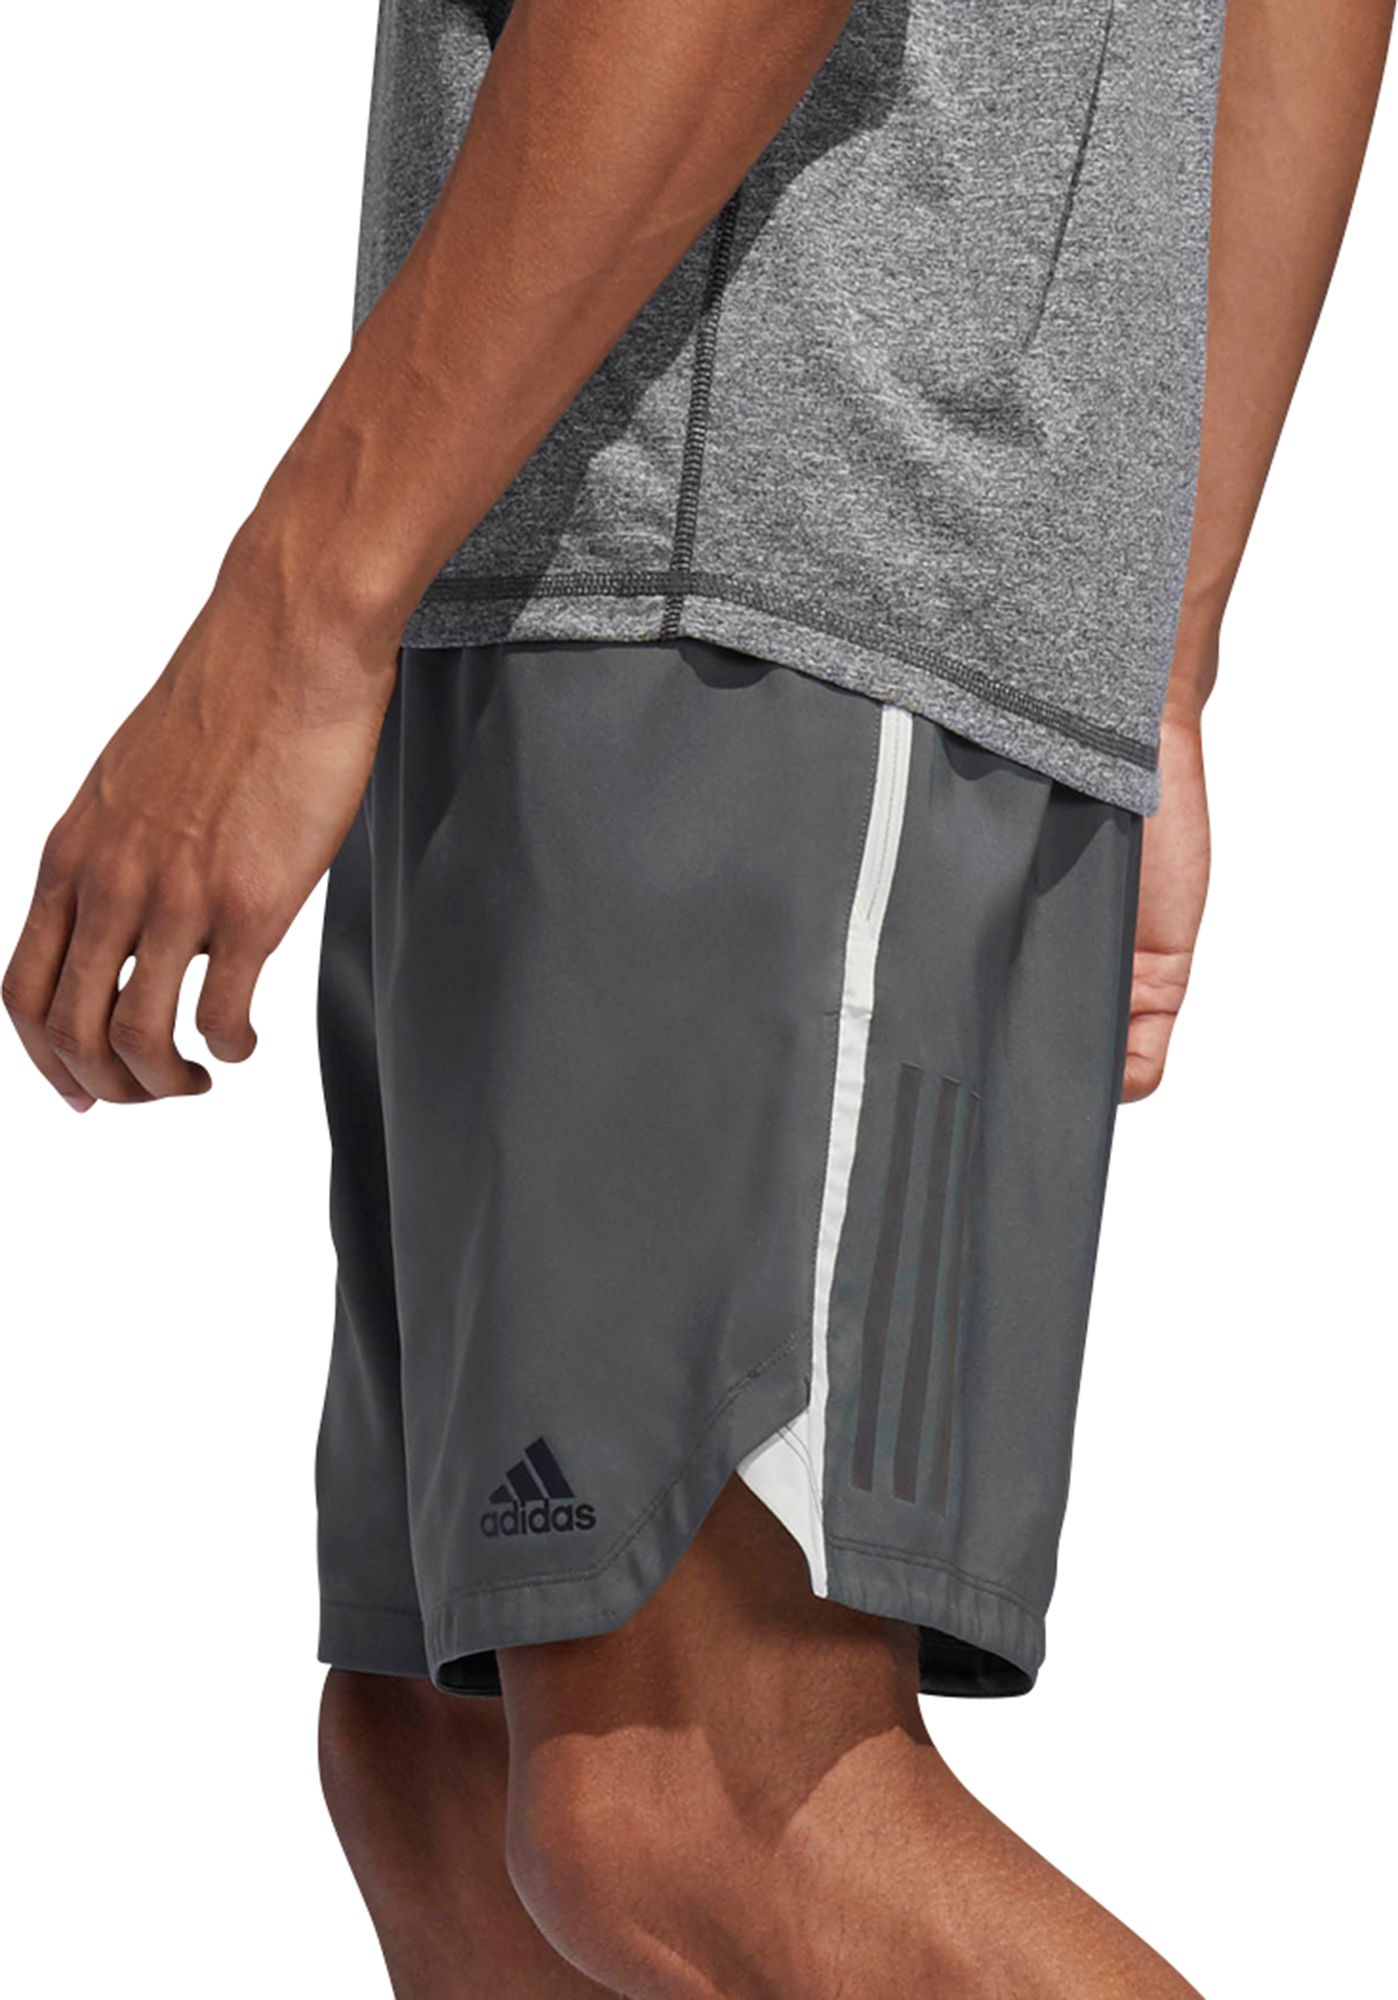 adidas Men's Axis Woven Elevated 3-Stripes Shorts - .97 - .97